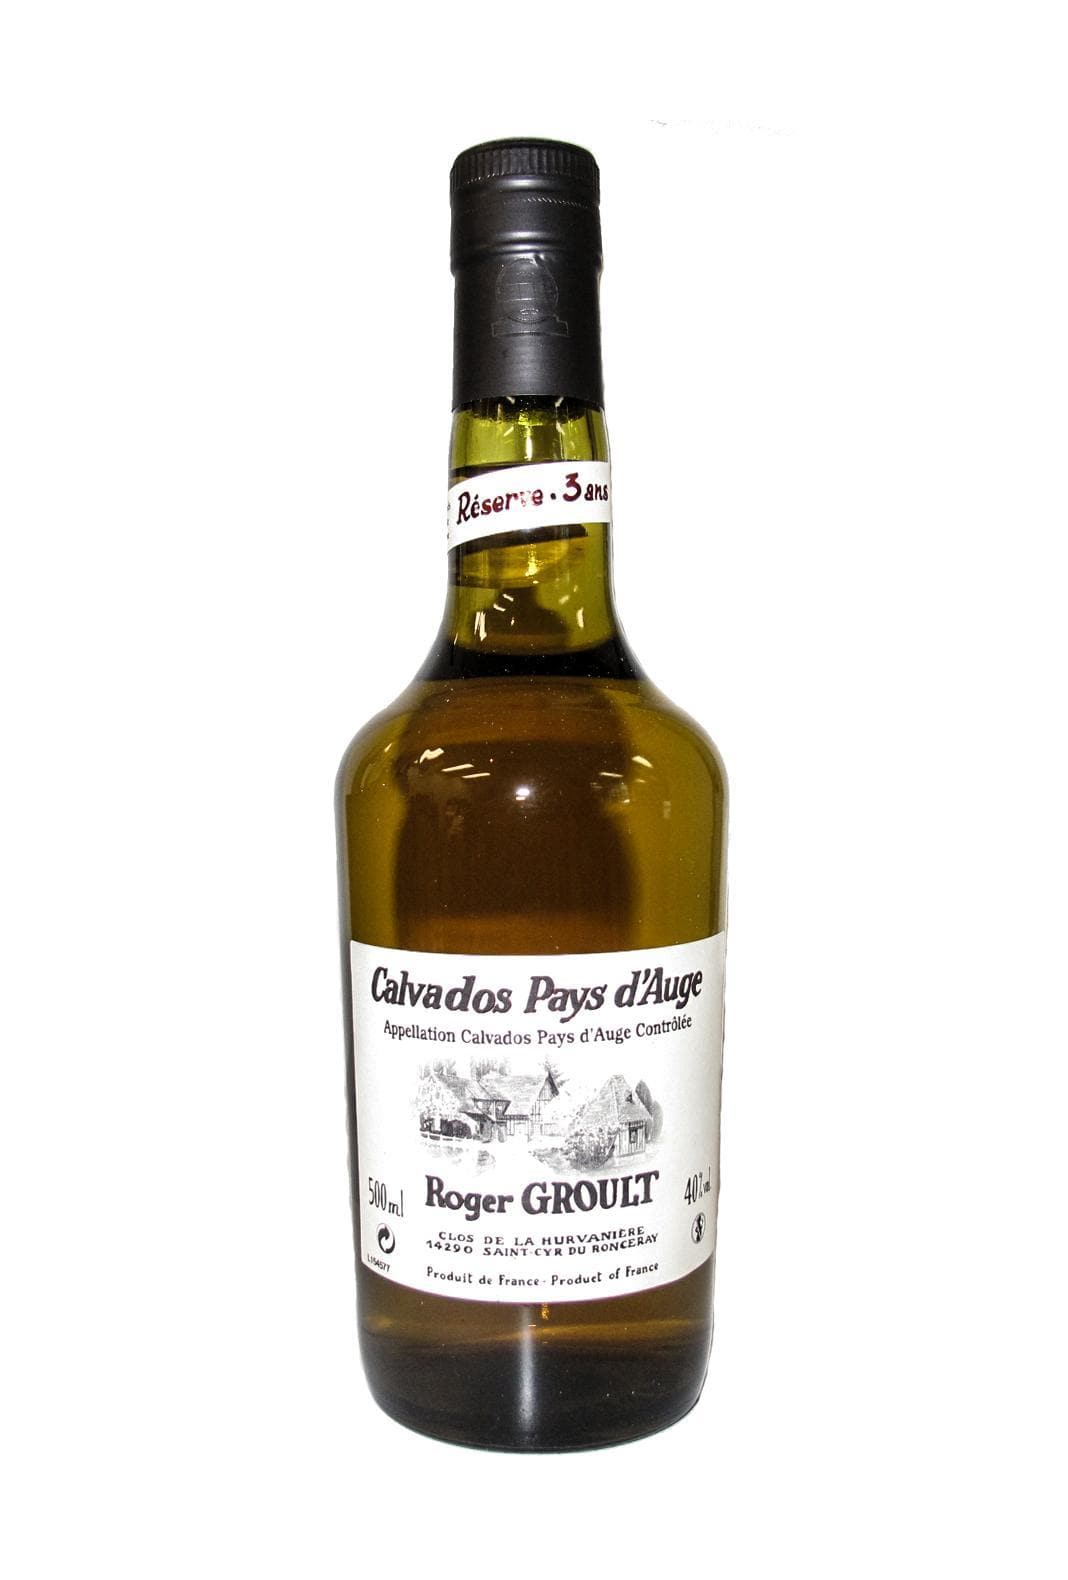 Roger Groult Calvados Pays D'Auge 3 years 40% 500ml | Brandy | Shop online at Spirits of France